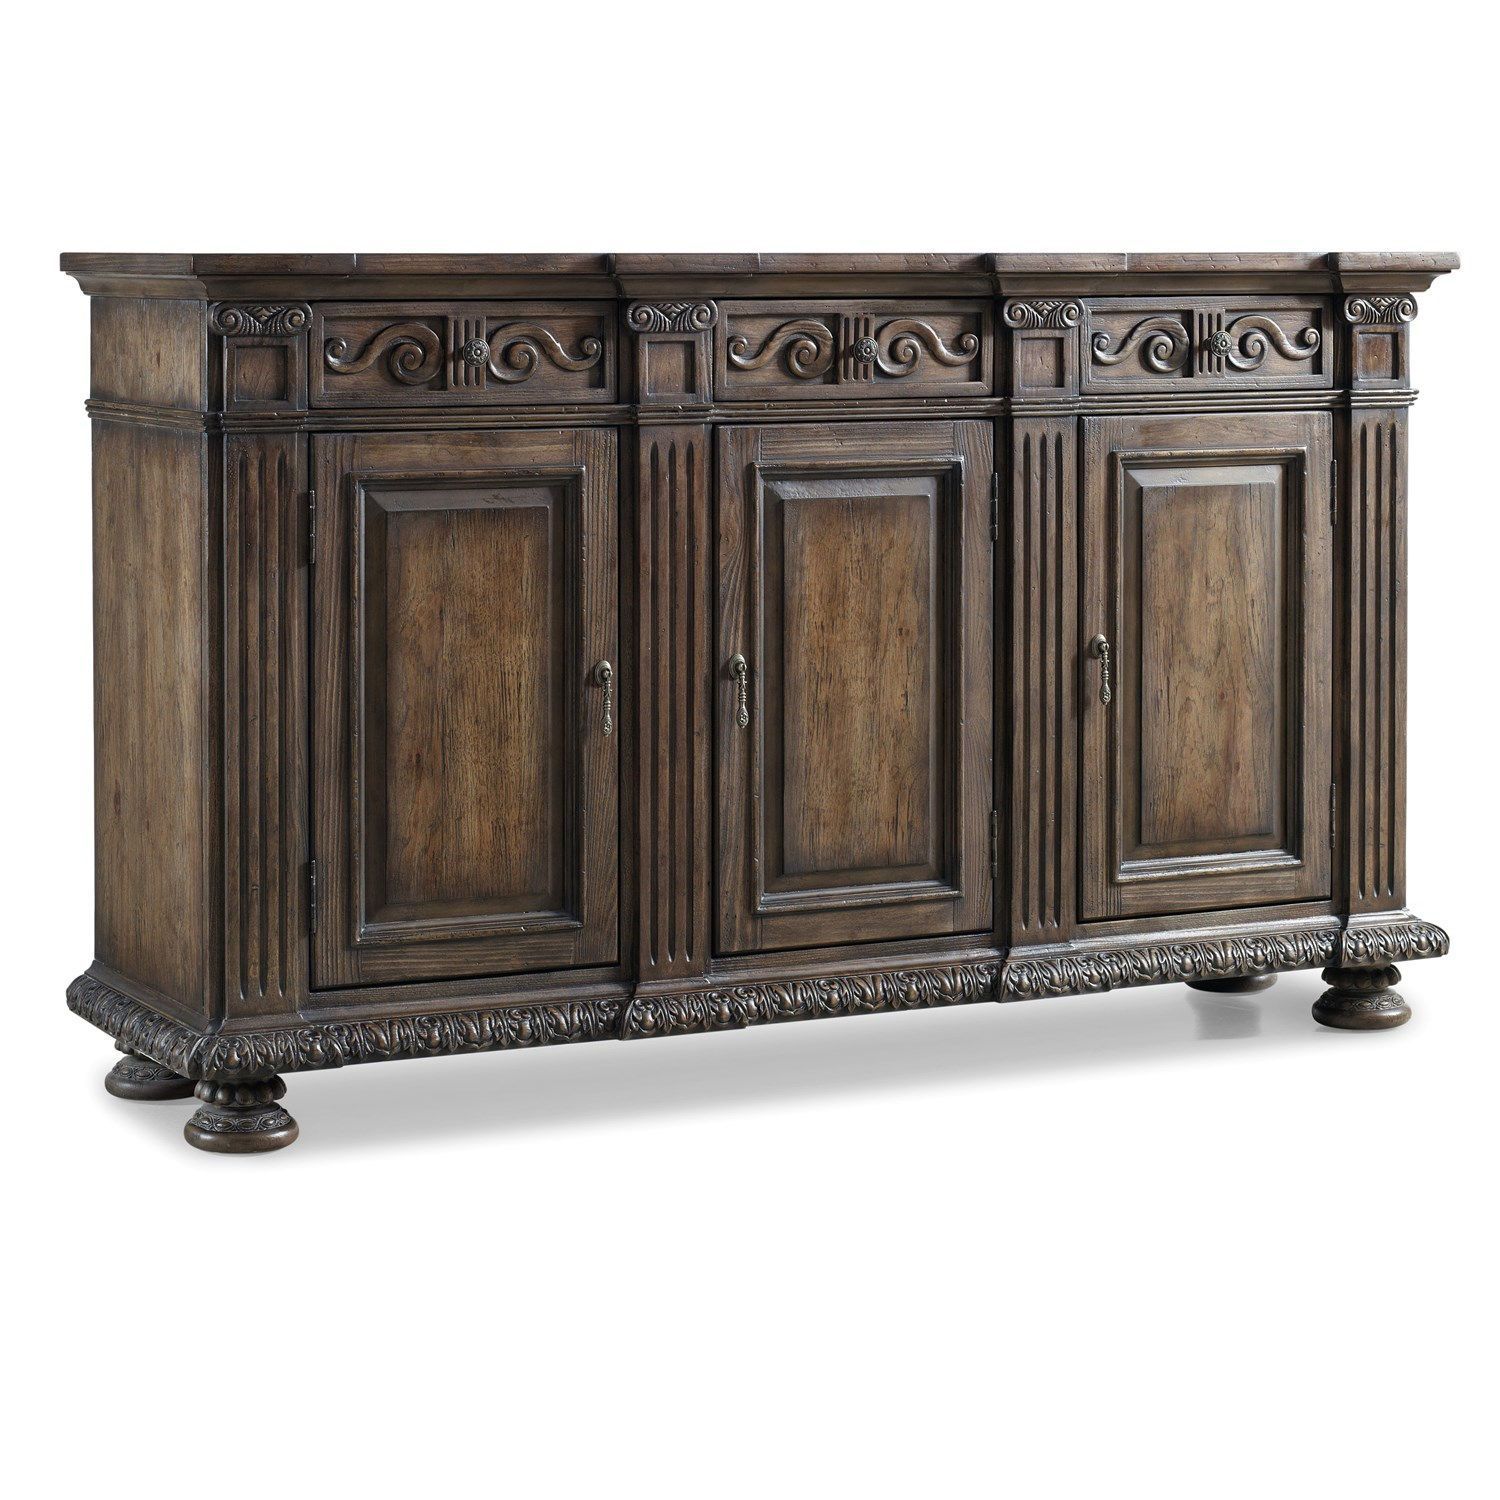 Hooker Furniture 5070 85001 Rhapsody 72" Credenza | Hooker Within Chalus Sideboards (View 13 of 30)